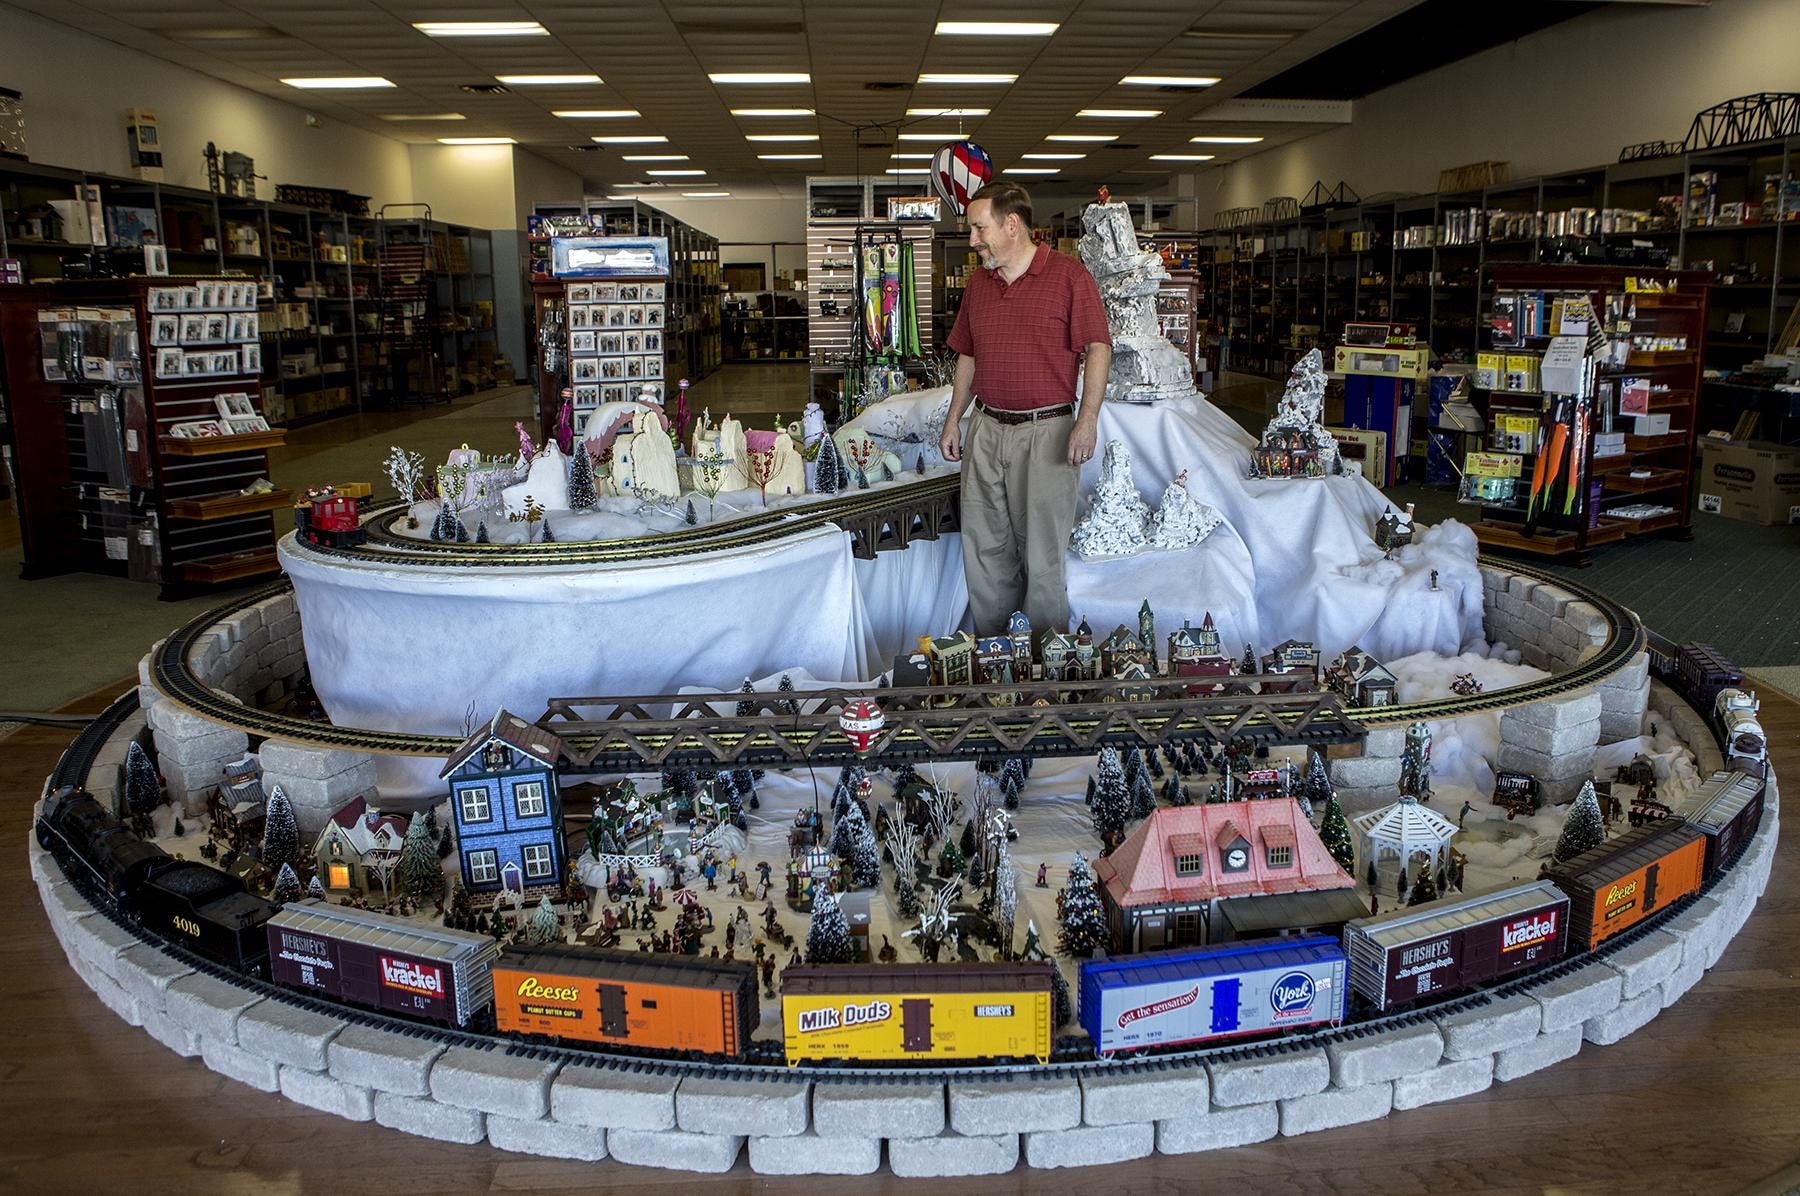 g scale train stores near me